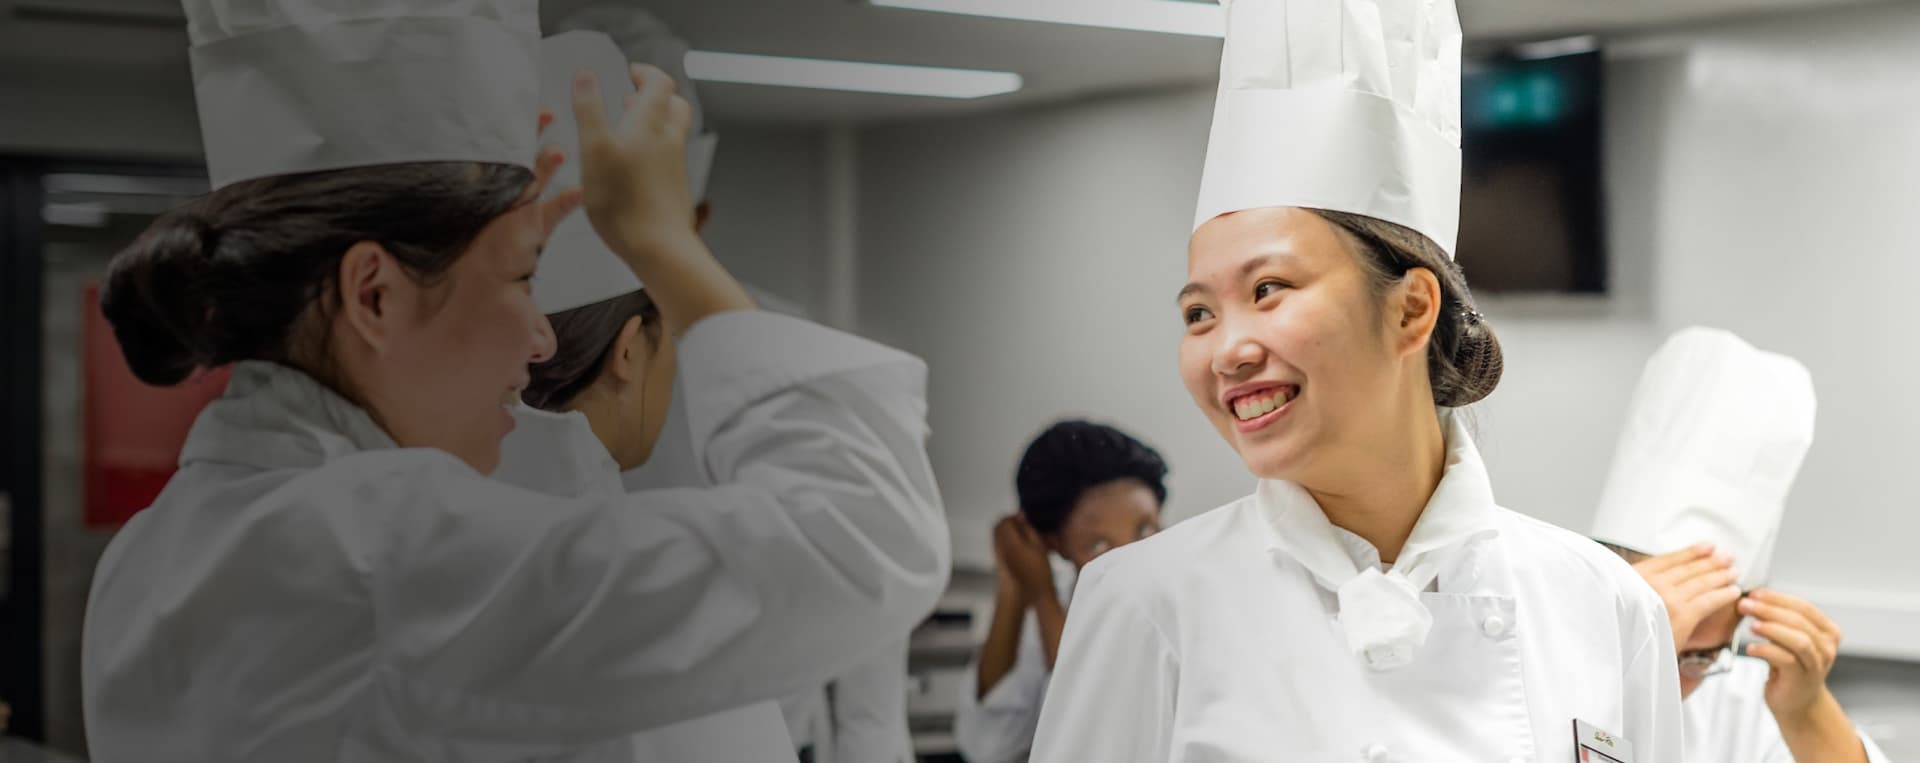 types of culinary degrees, culinary degree types, colleges that offer bachelor's degree in culinary arts, bachelors in culinary arts online, culinary and business degree, culinary business degree